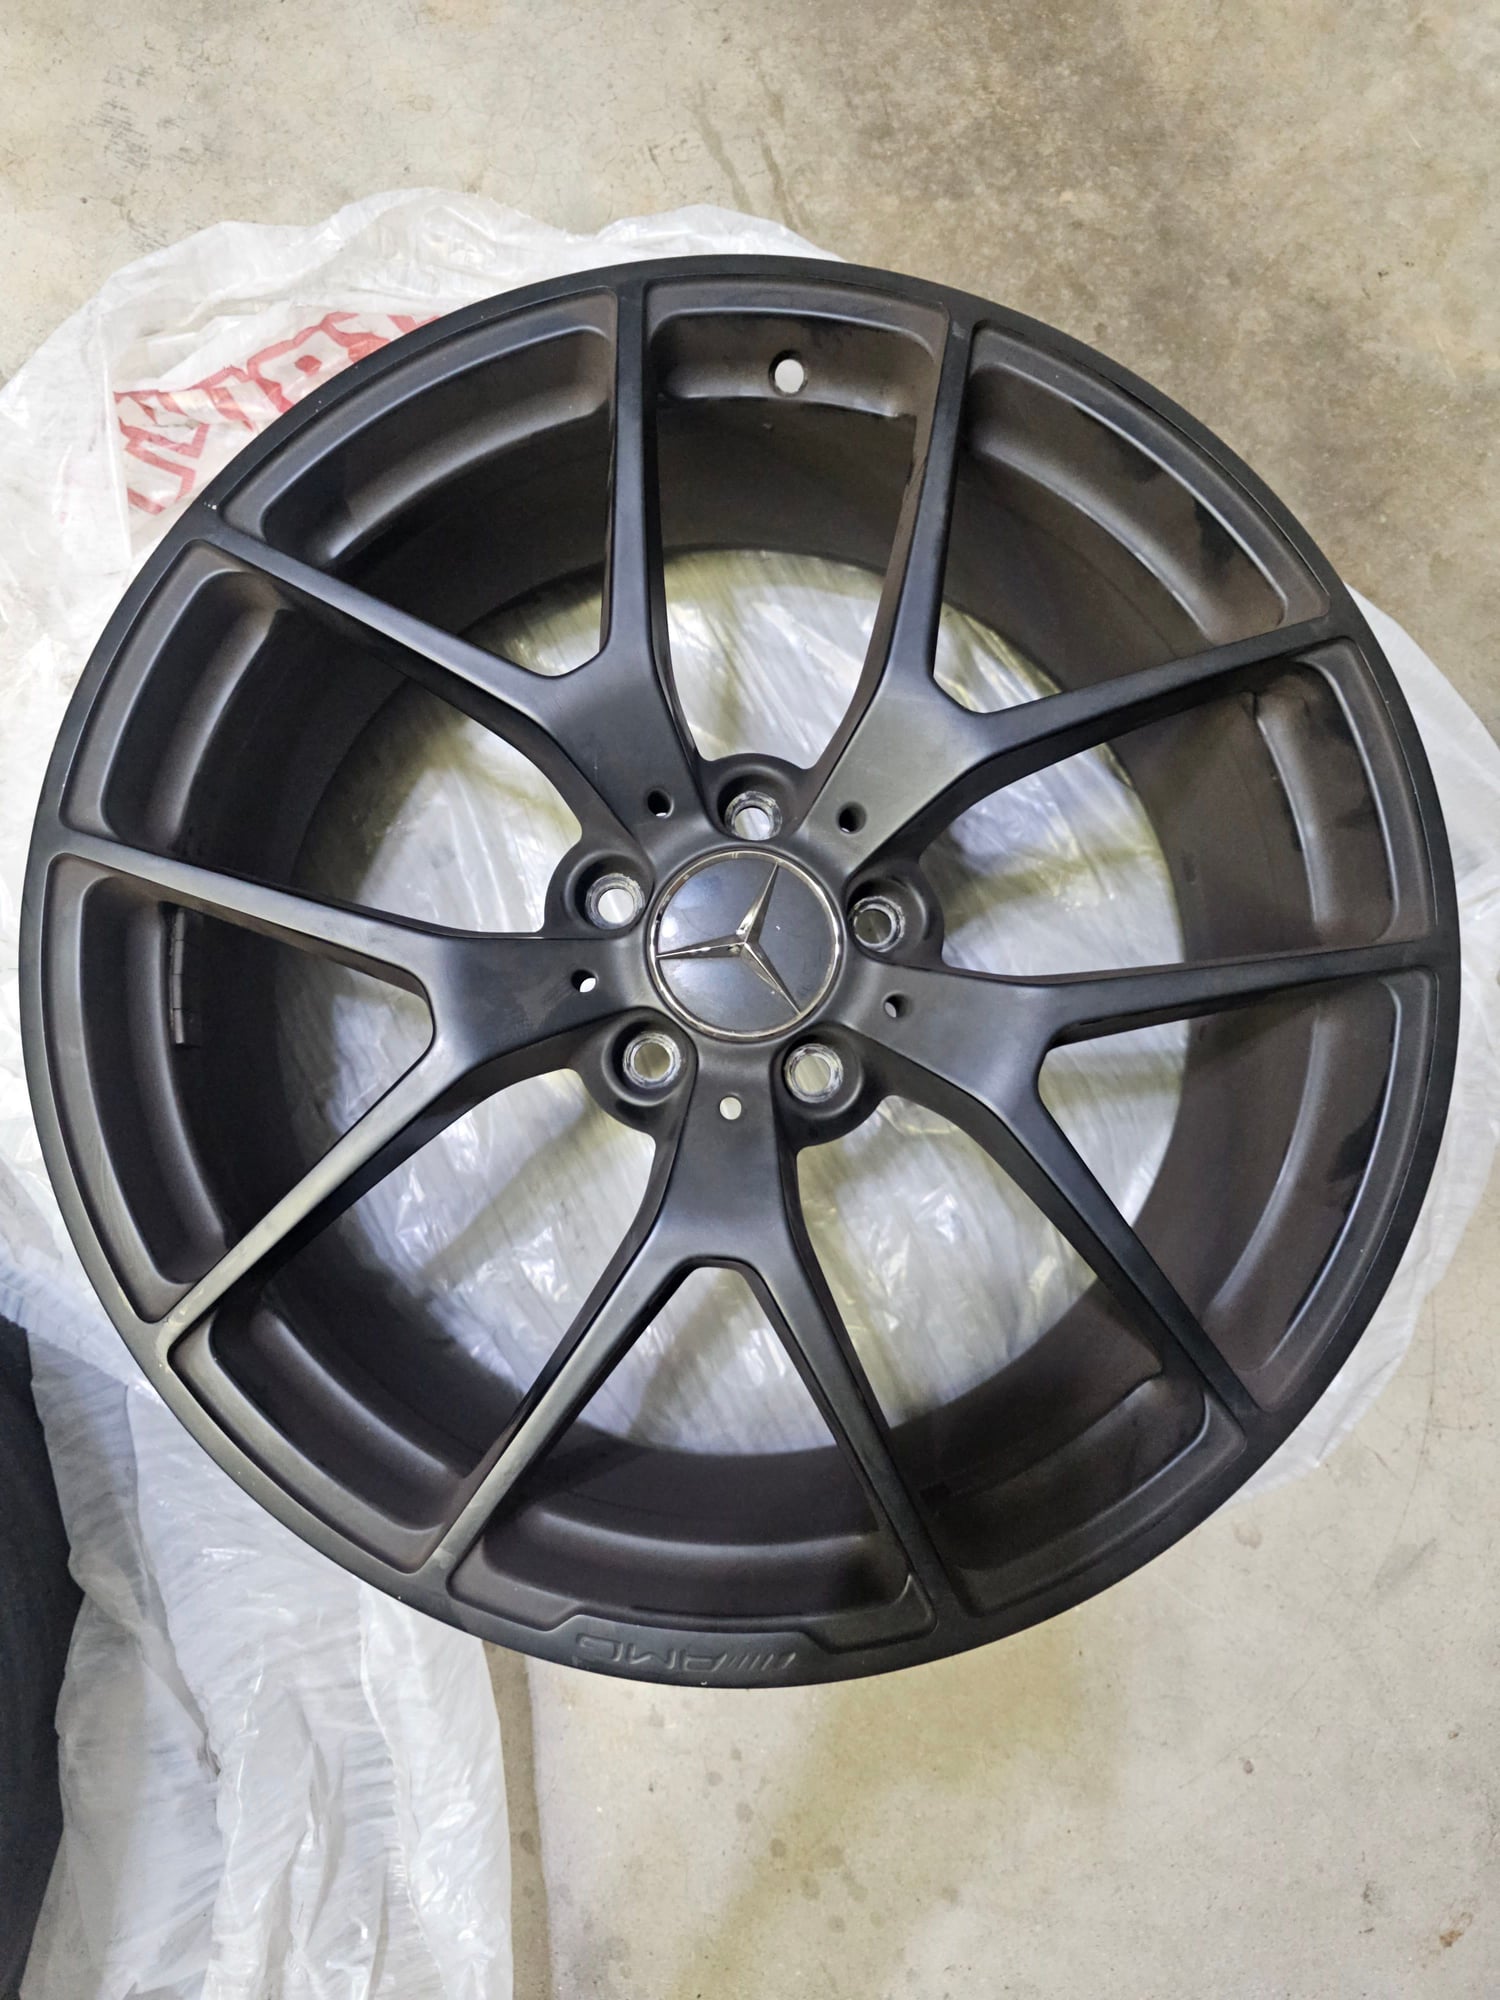 Wheels and Tires/Axles - FS: OEM 2015 C63 507 wheels - Used - 2008 to 2015 Mercedes-Benz C63 AMG - Lithia Springs, GA 30122, United States